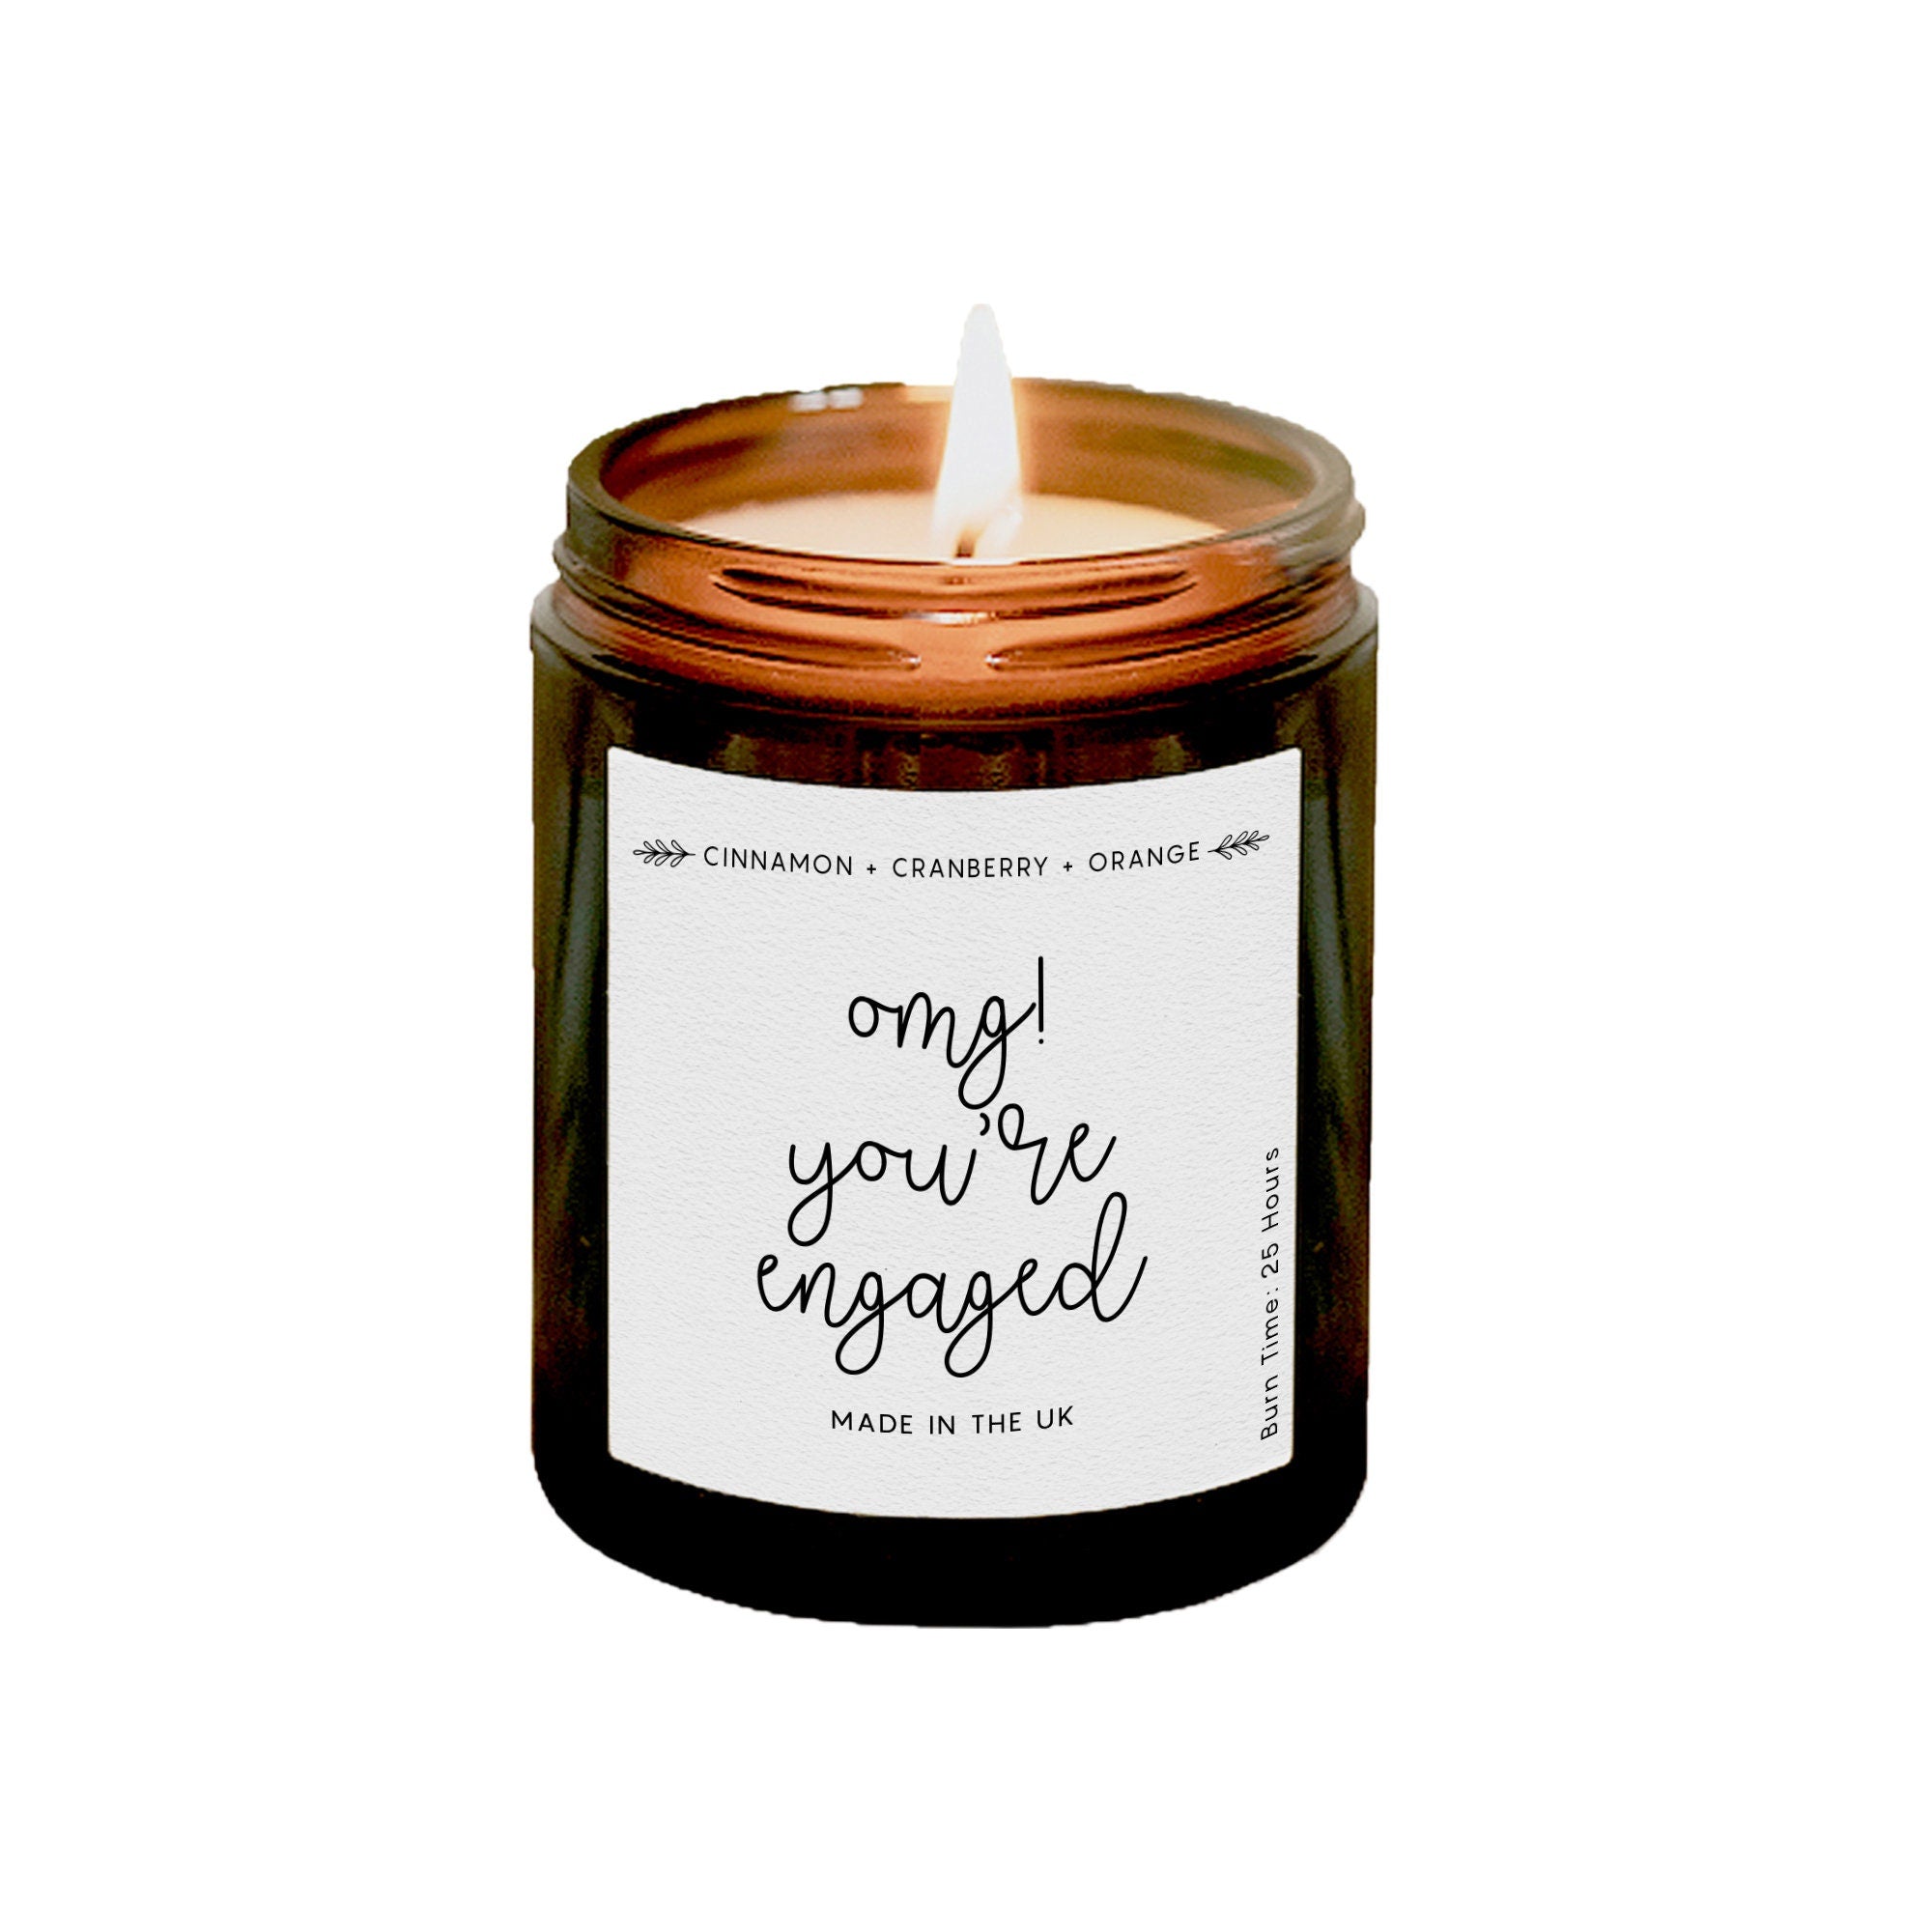 Omg! You'Re Engaged Candle, Engagement Gift, Mr Mrs Gift, Soy Wax Apothecary Scented Candle